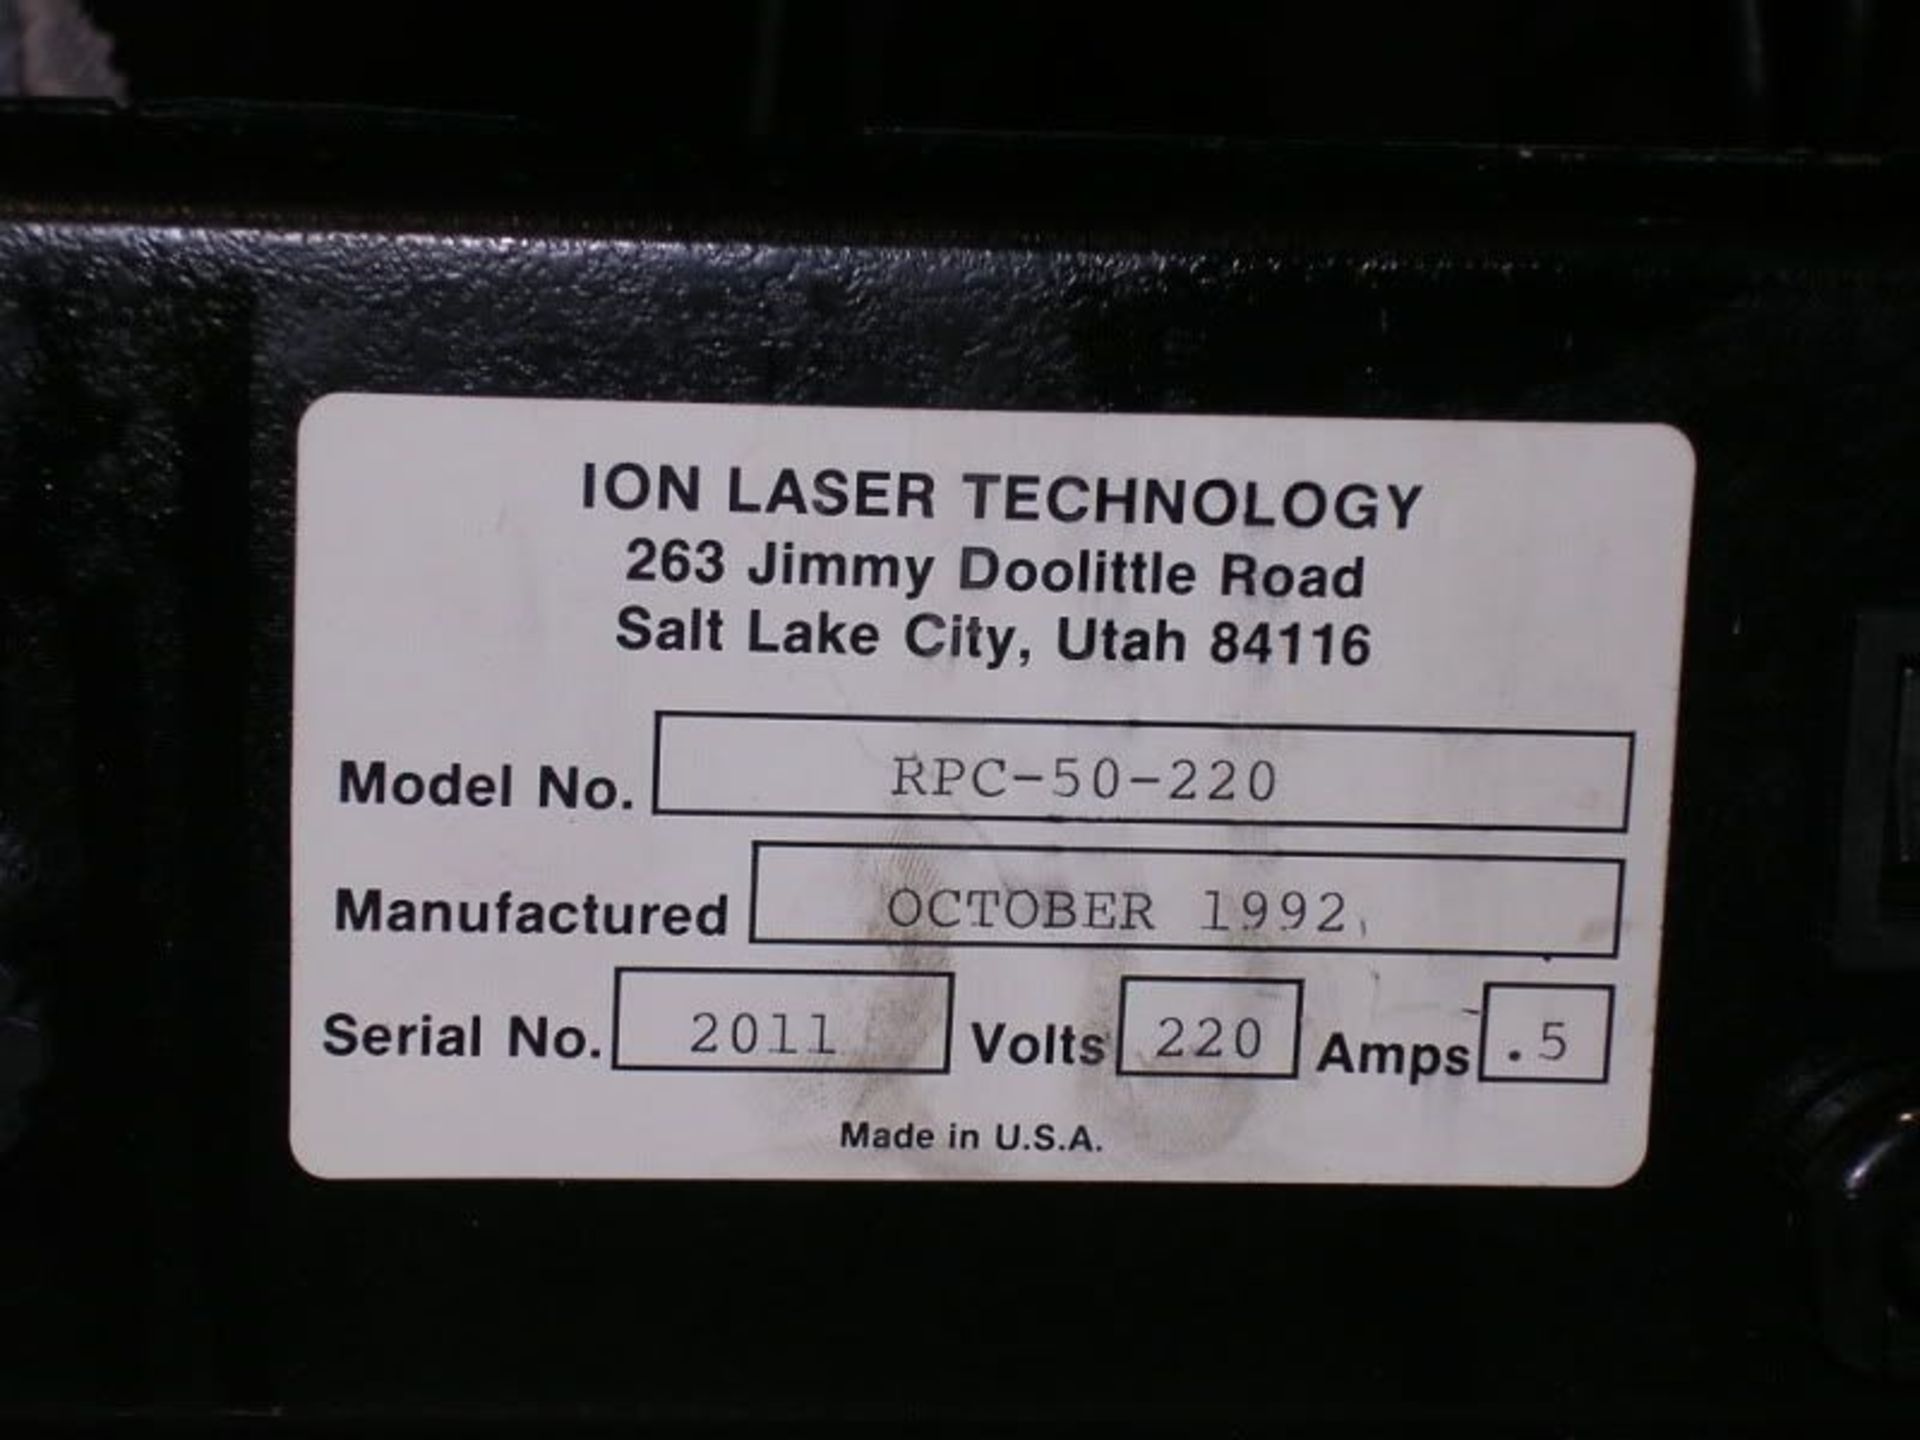 Ion Laser Technology 5500 Series Argon W/ Control Unit, Qty 1, 321462198421 - Image 6 of 8